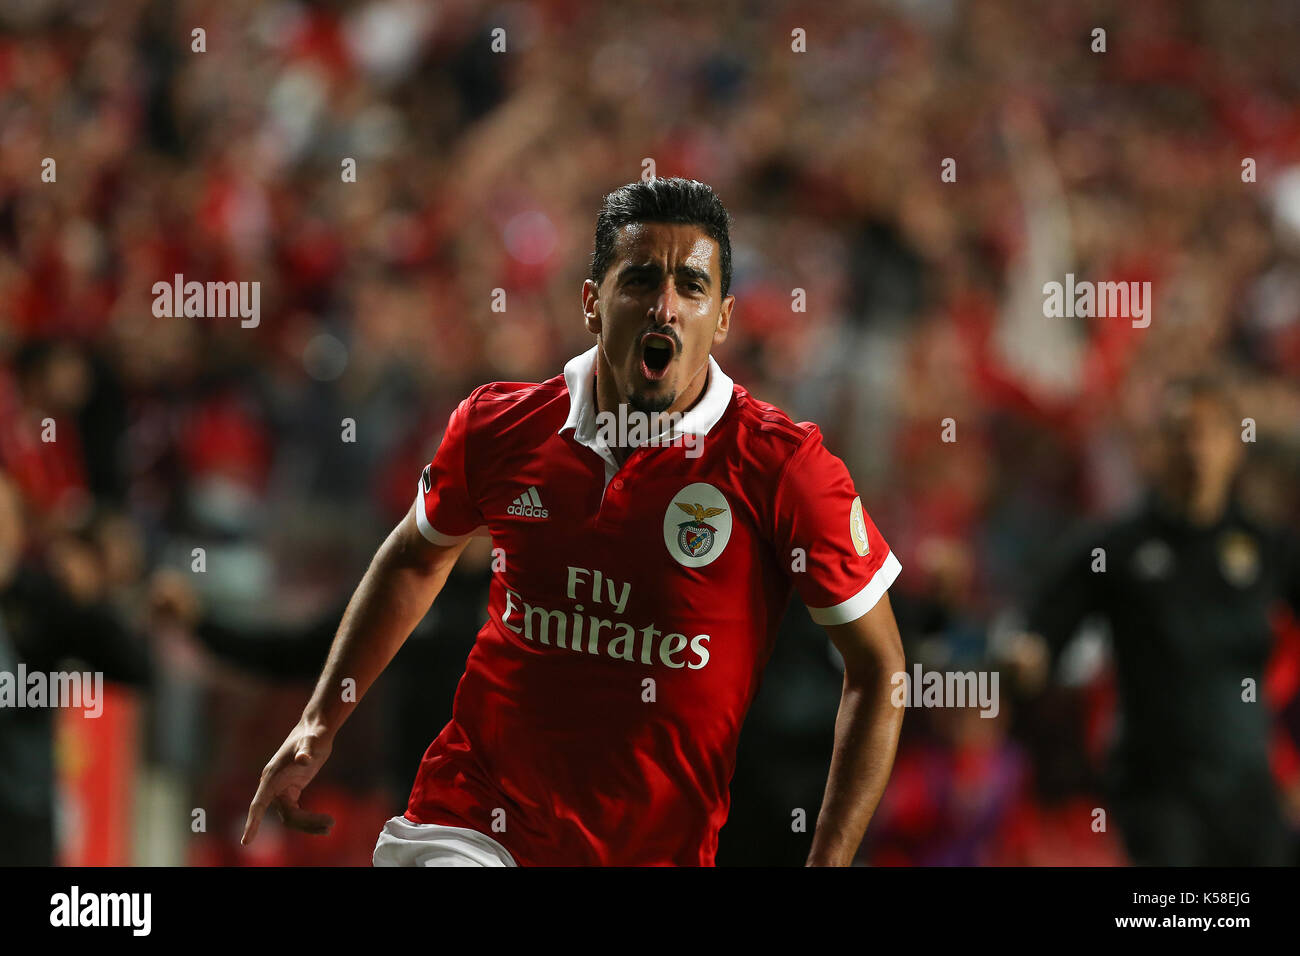 Benfica«s defender Andre Almeida from Portugal celebrating after scoring a goal during the Premier League 2017/18 match between SL Benfica v Portimonense SC, at Luz Stadium in Lisbon on September 8, 2017. (Photo by Bruno Barros / DPI) Stock Photo